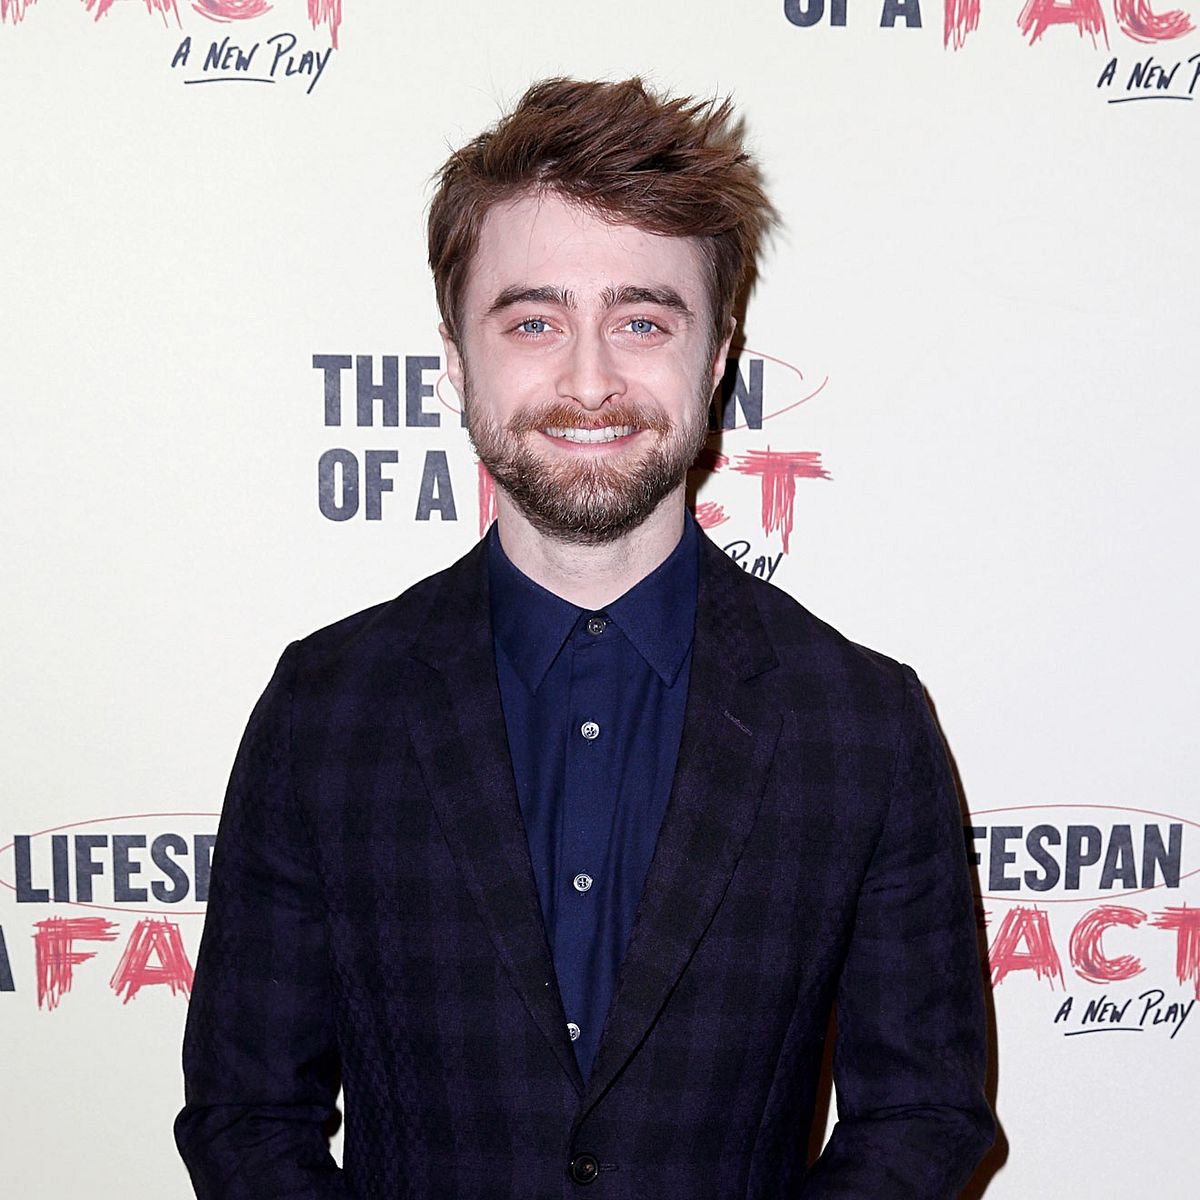 Daniel Radcliffe hier bei der The Lifespan of A Fact Party in New York.